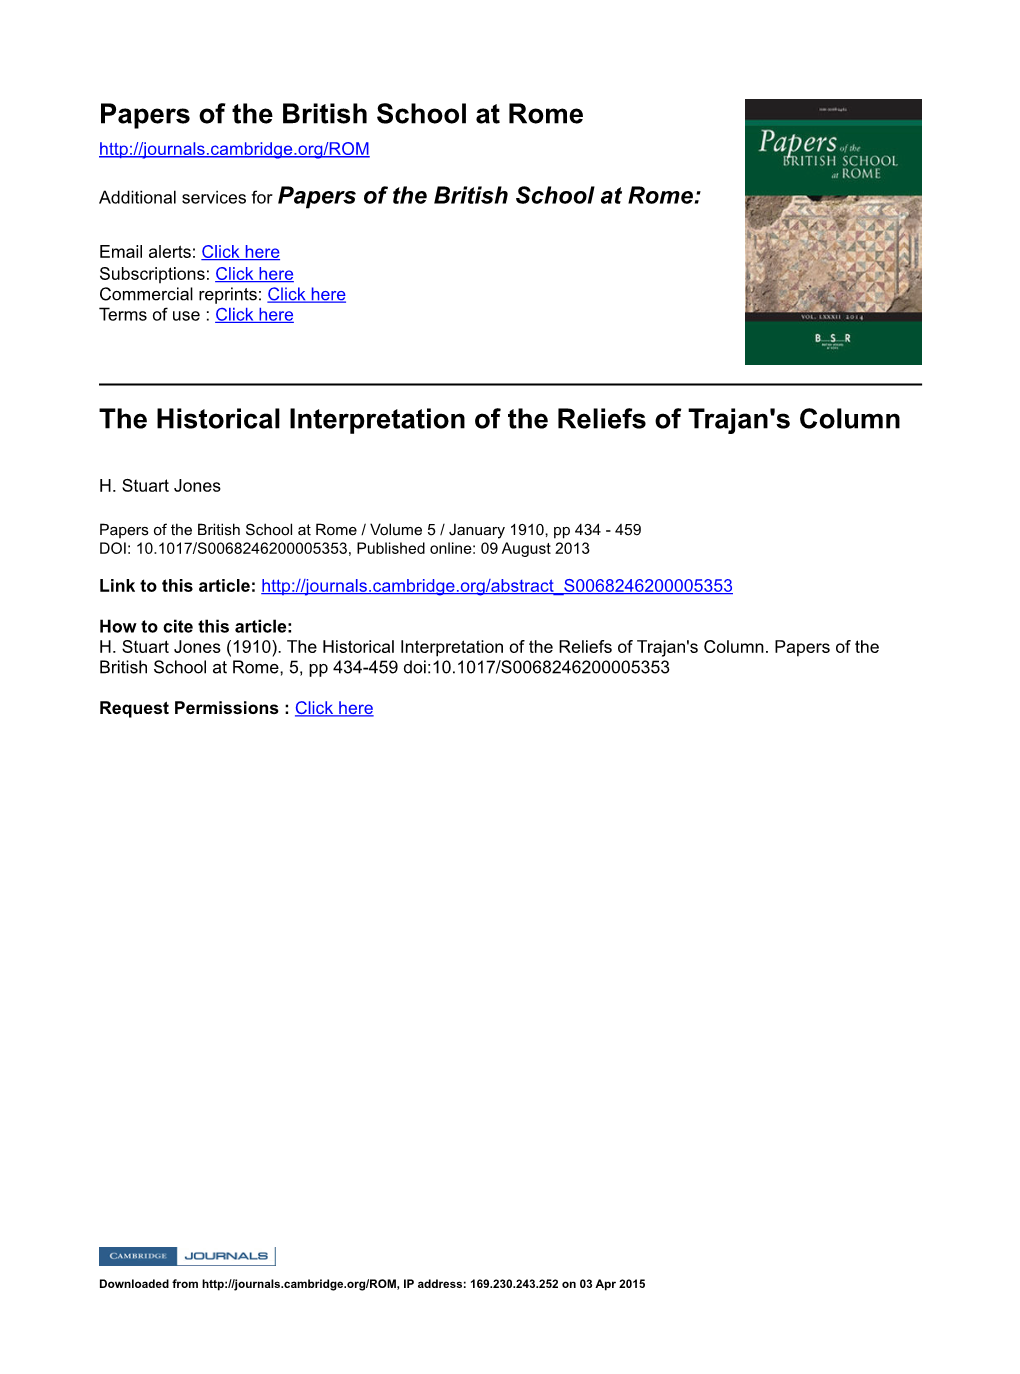 Papers of the British School at Rome the Historical